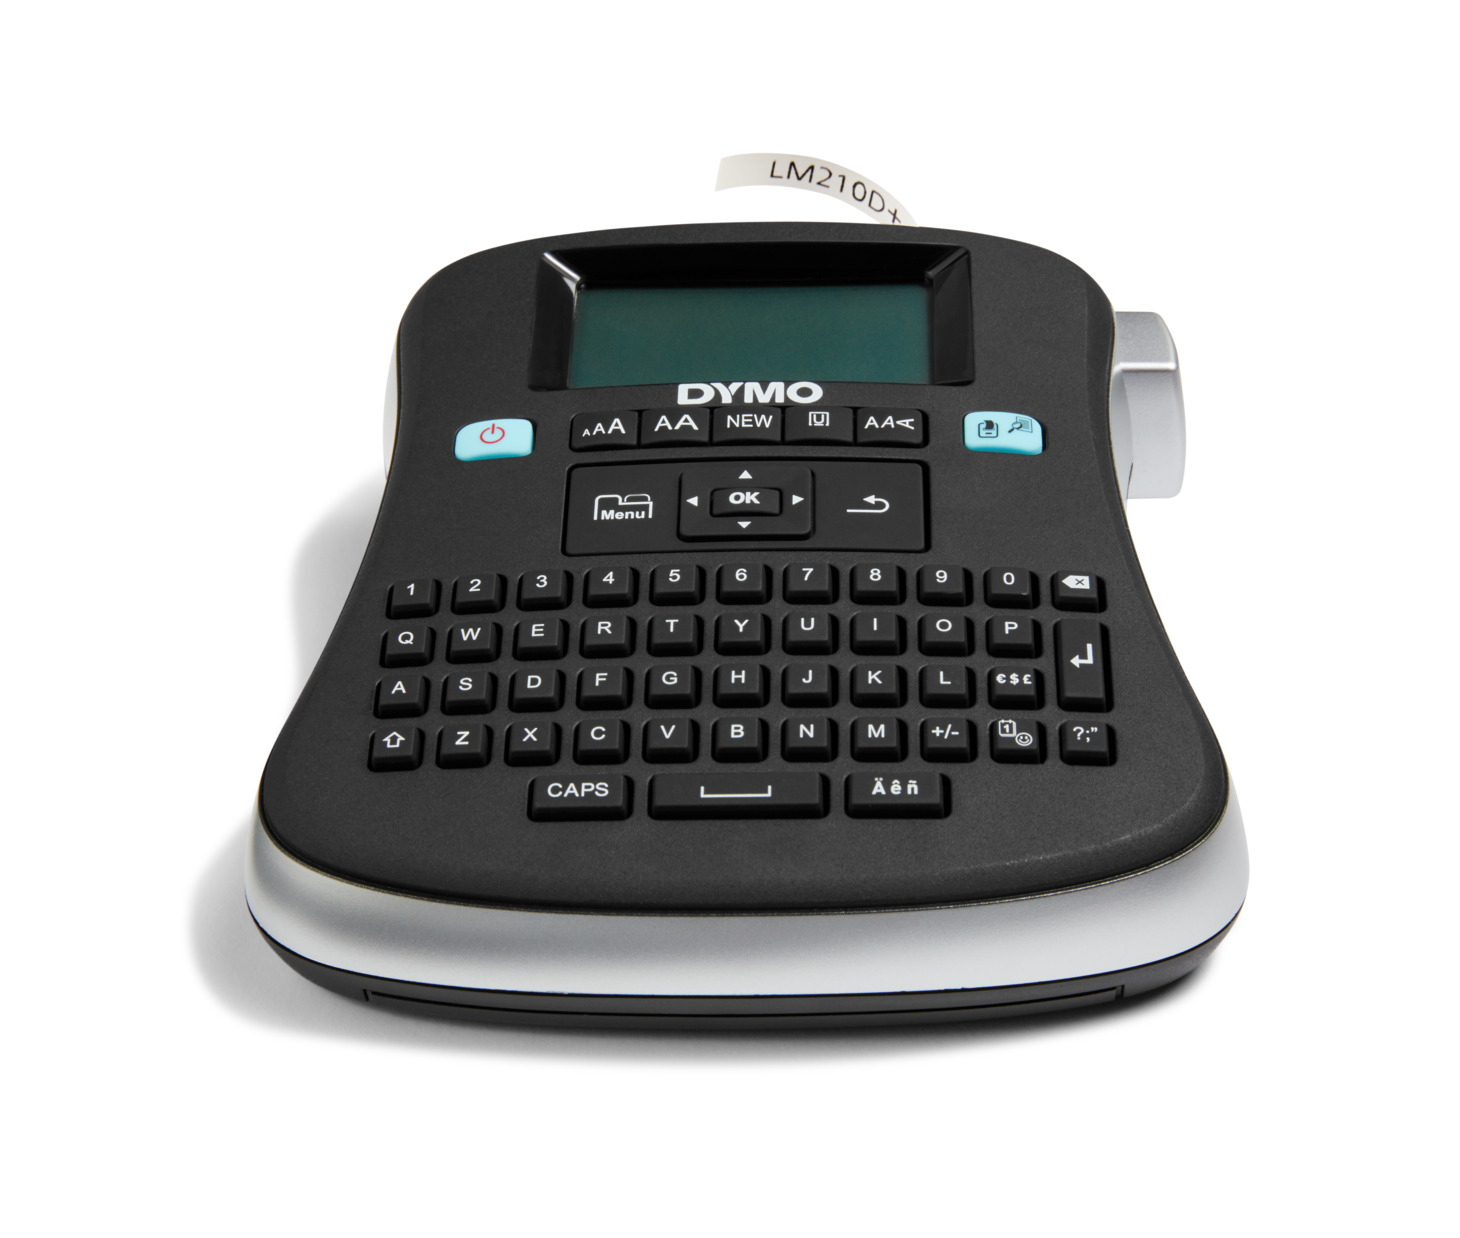 DYMO DYMO&#174; LabelManager™ 210D+ - QWY